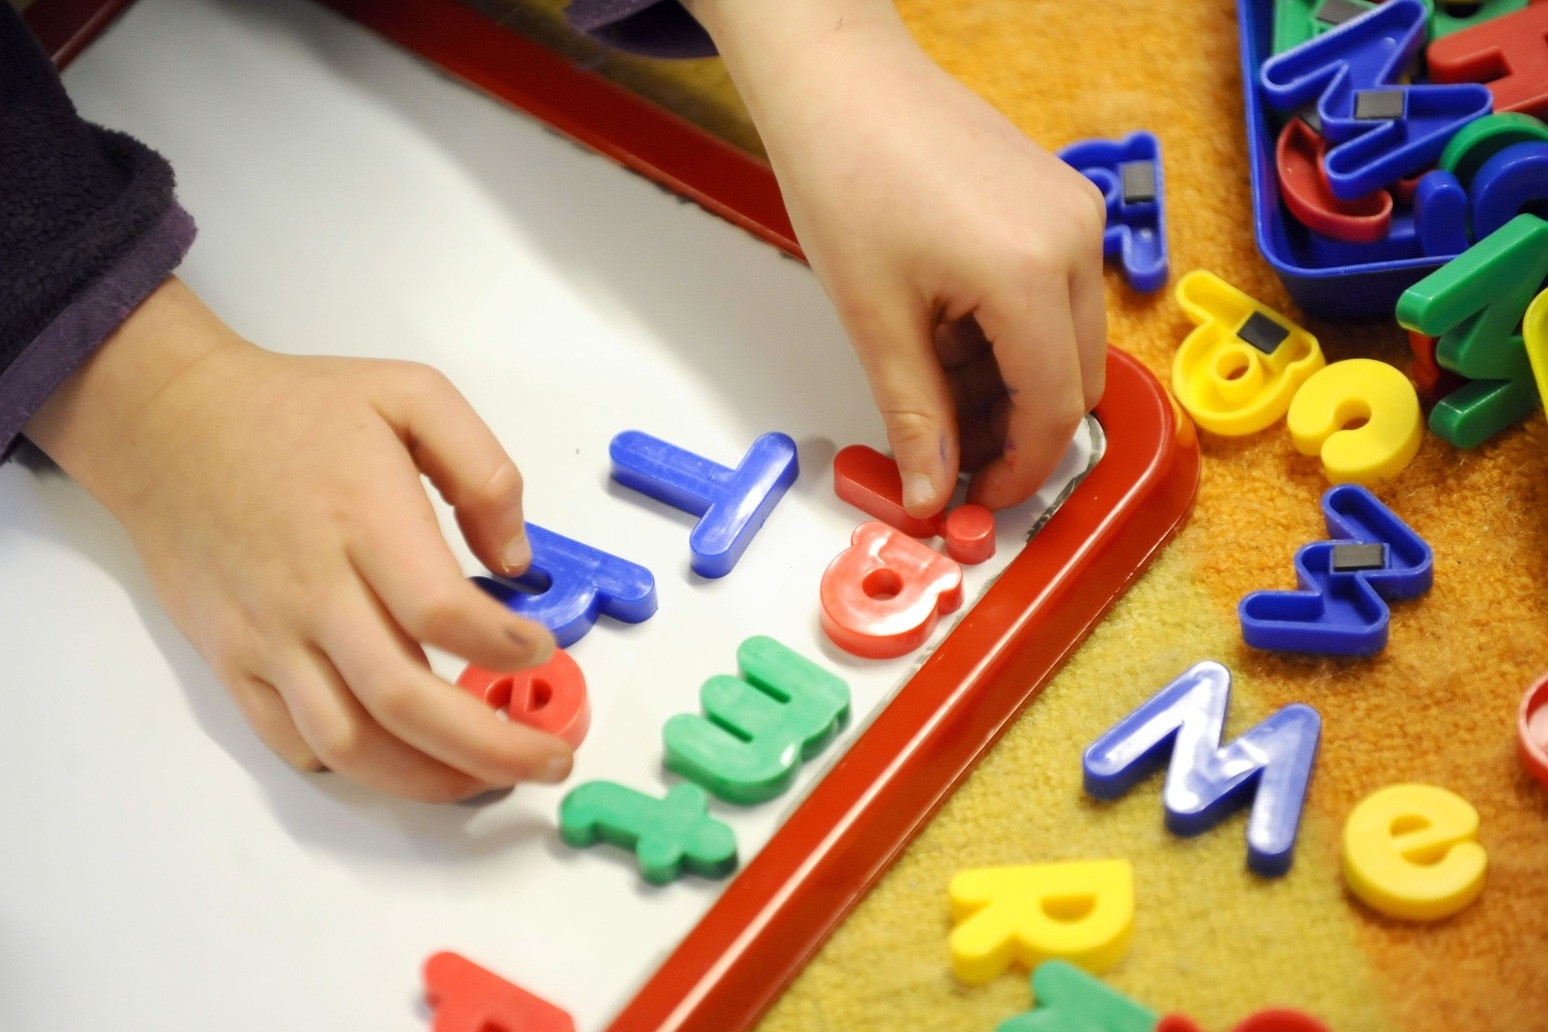 Government package aimed at cutting childcare costs branded pathetic